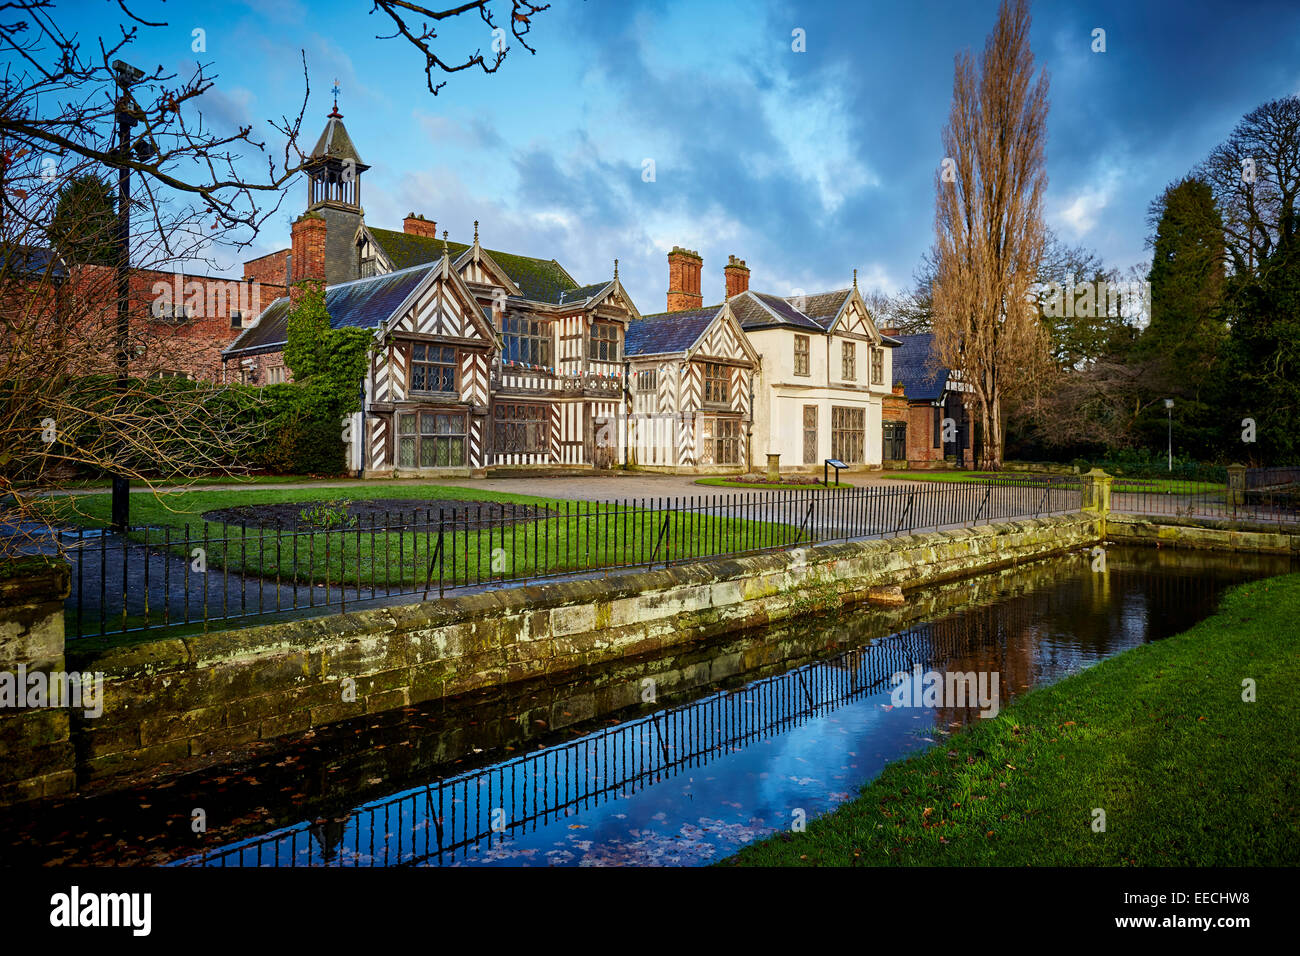 Wythenshawe Hall is a 16th-century medieval timber-framed historic house and former stately home in Wythenshawe park, Manchester Stock Photo